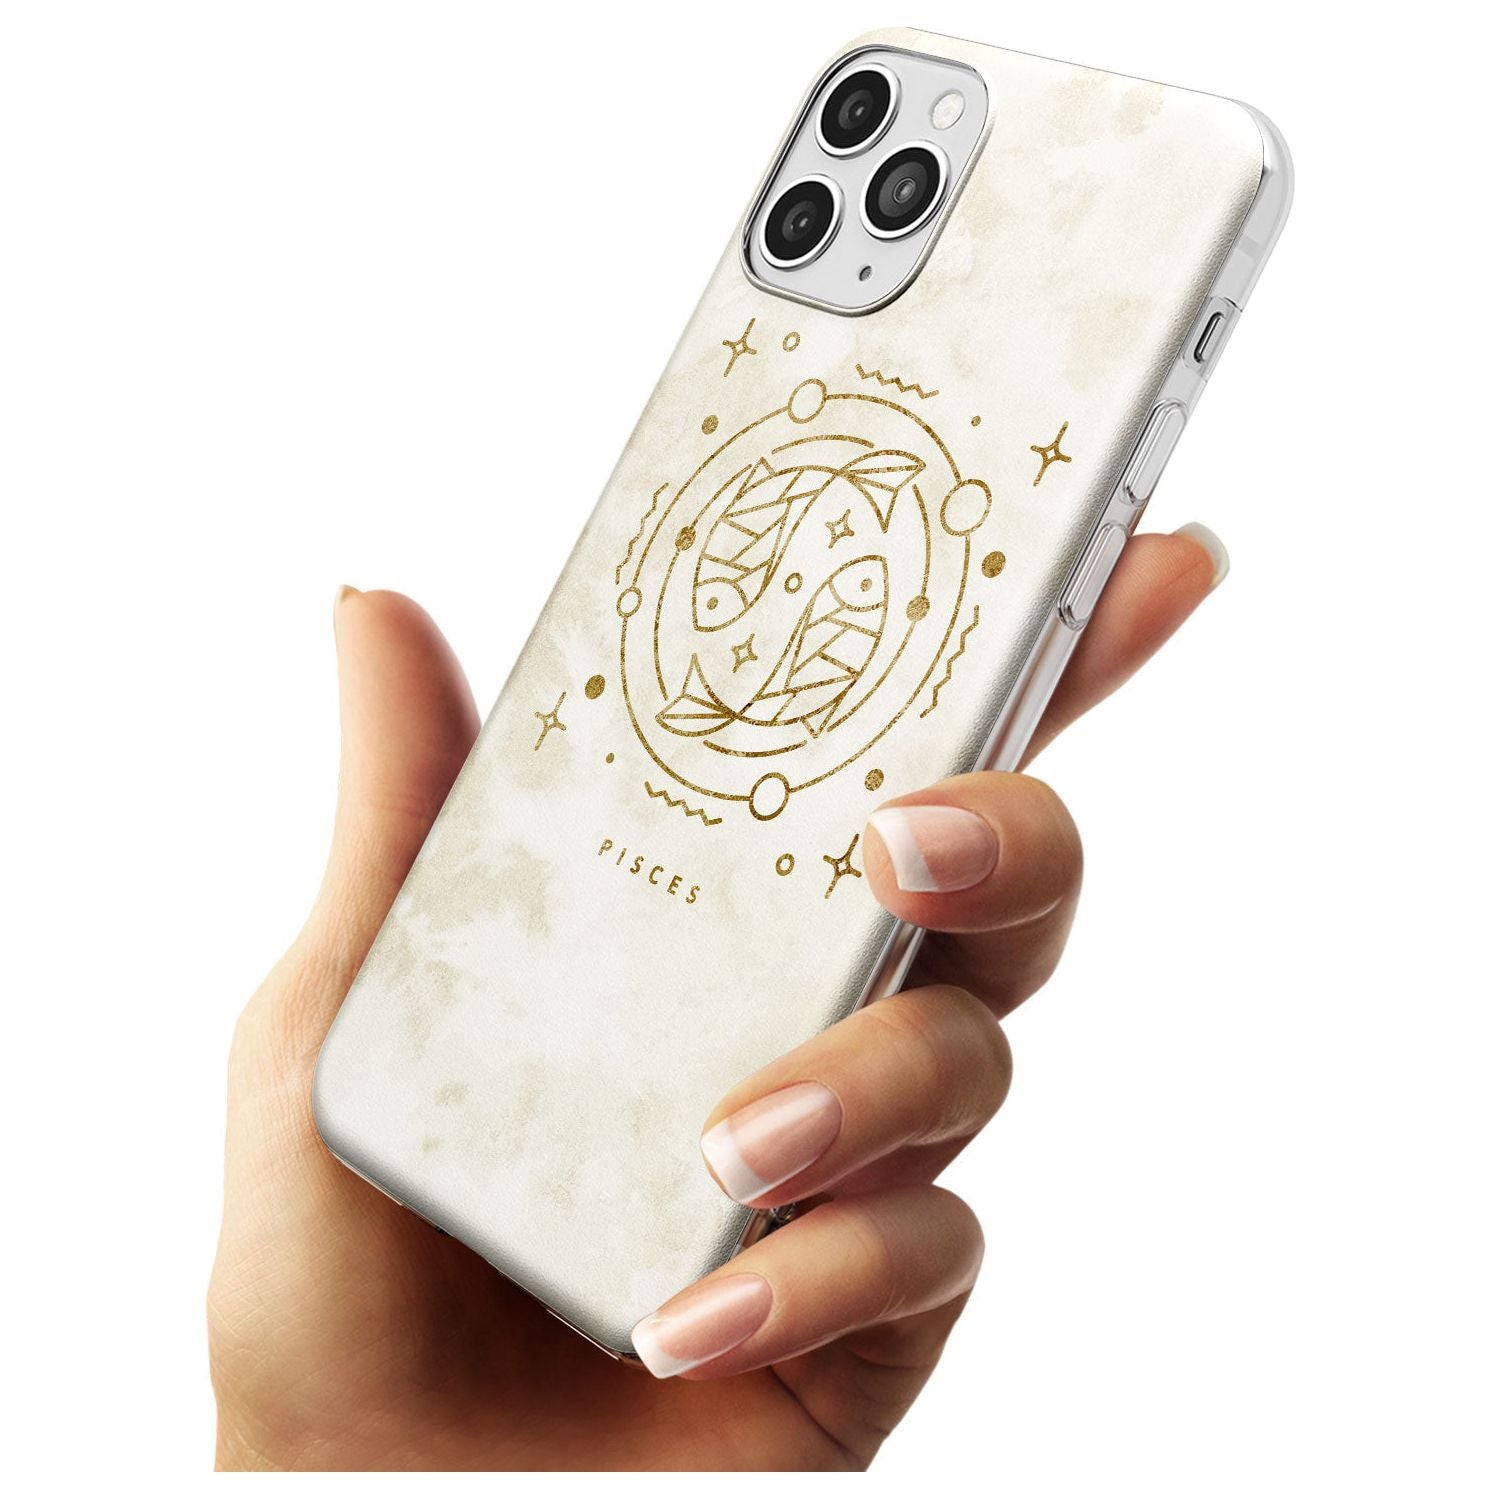 Pisces Emblem - Solid Gold Marbled Design Slim TPU Phone Case for iPhone 11 Pro Max